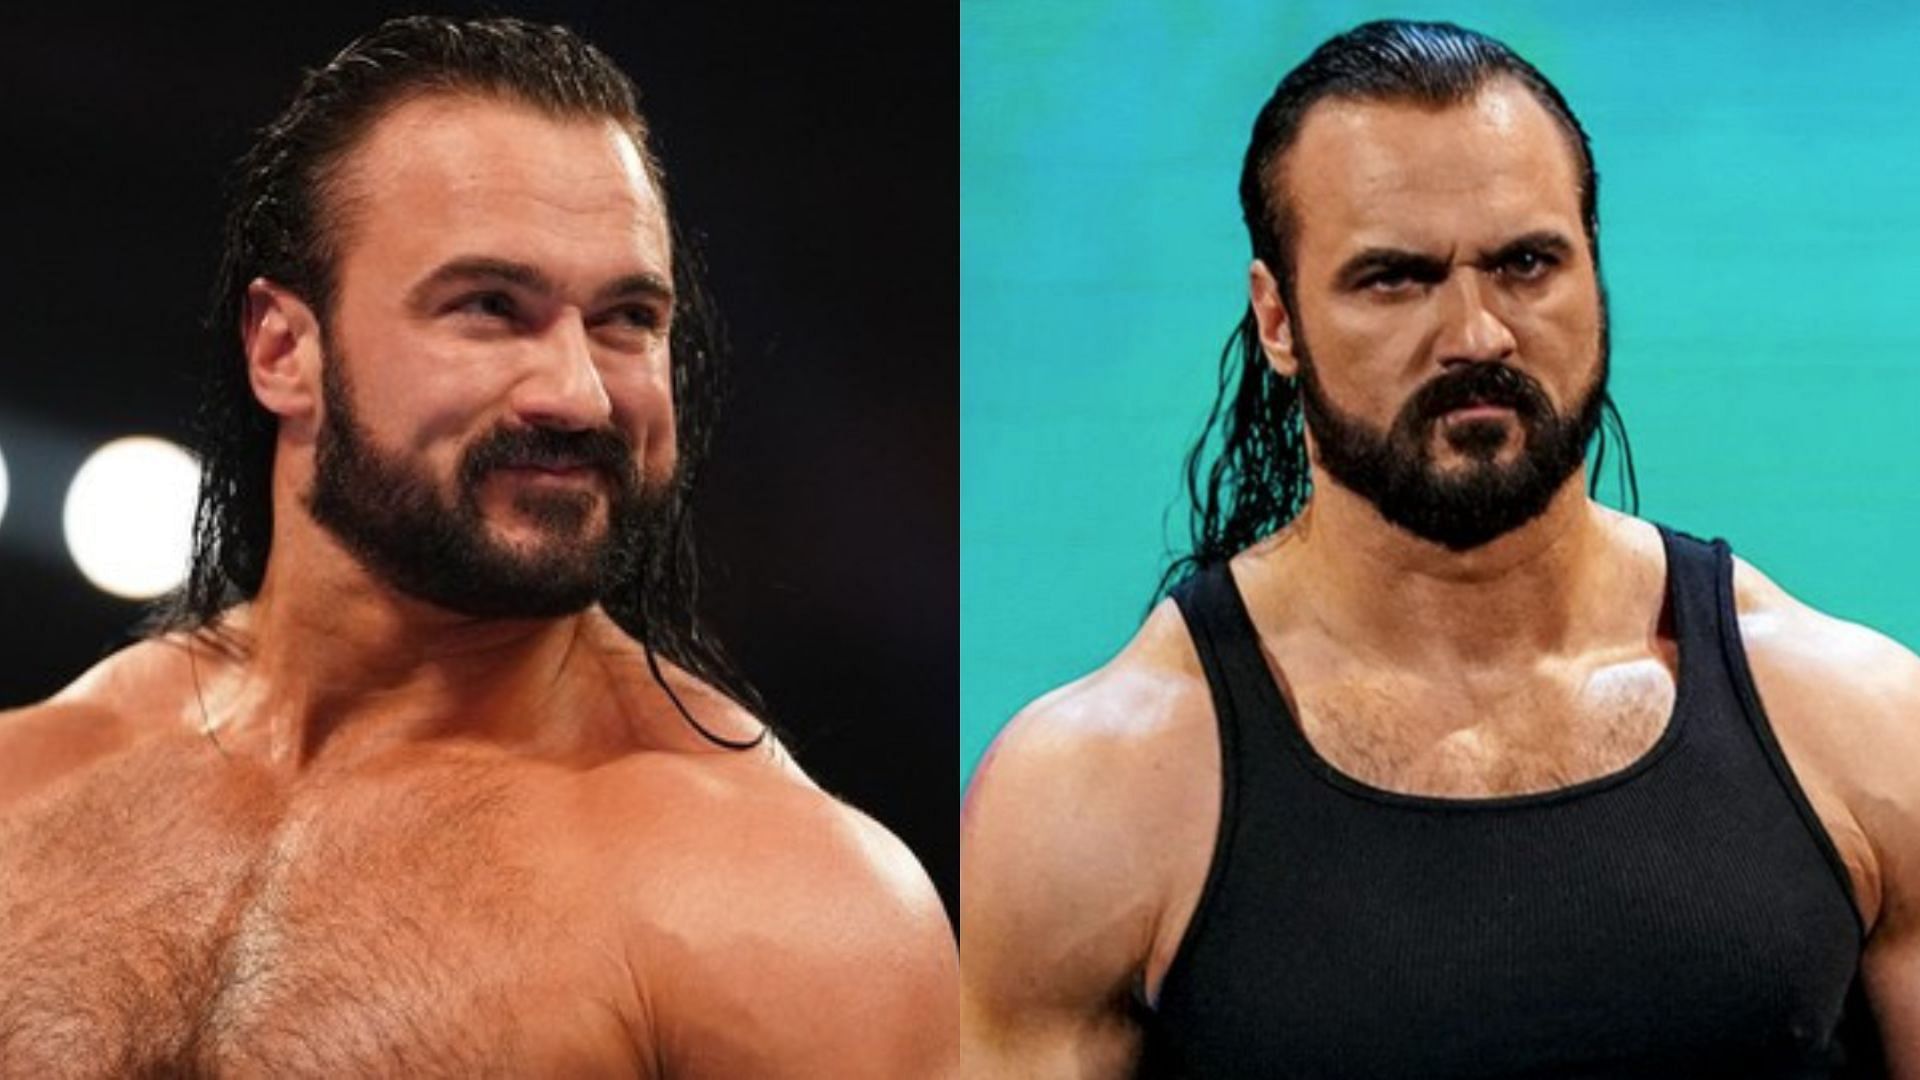 Drew McIntyre appeared this past Saturday at WWE Money in the Bank. 